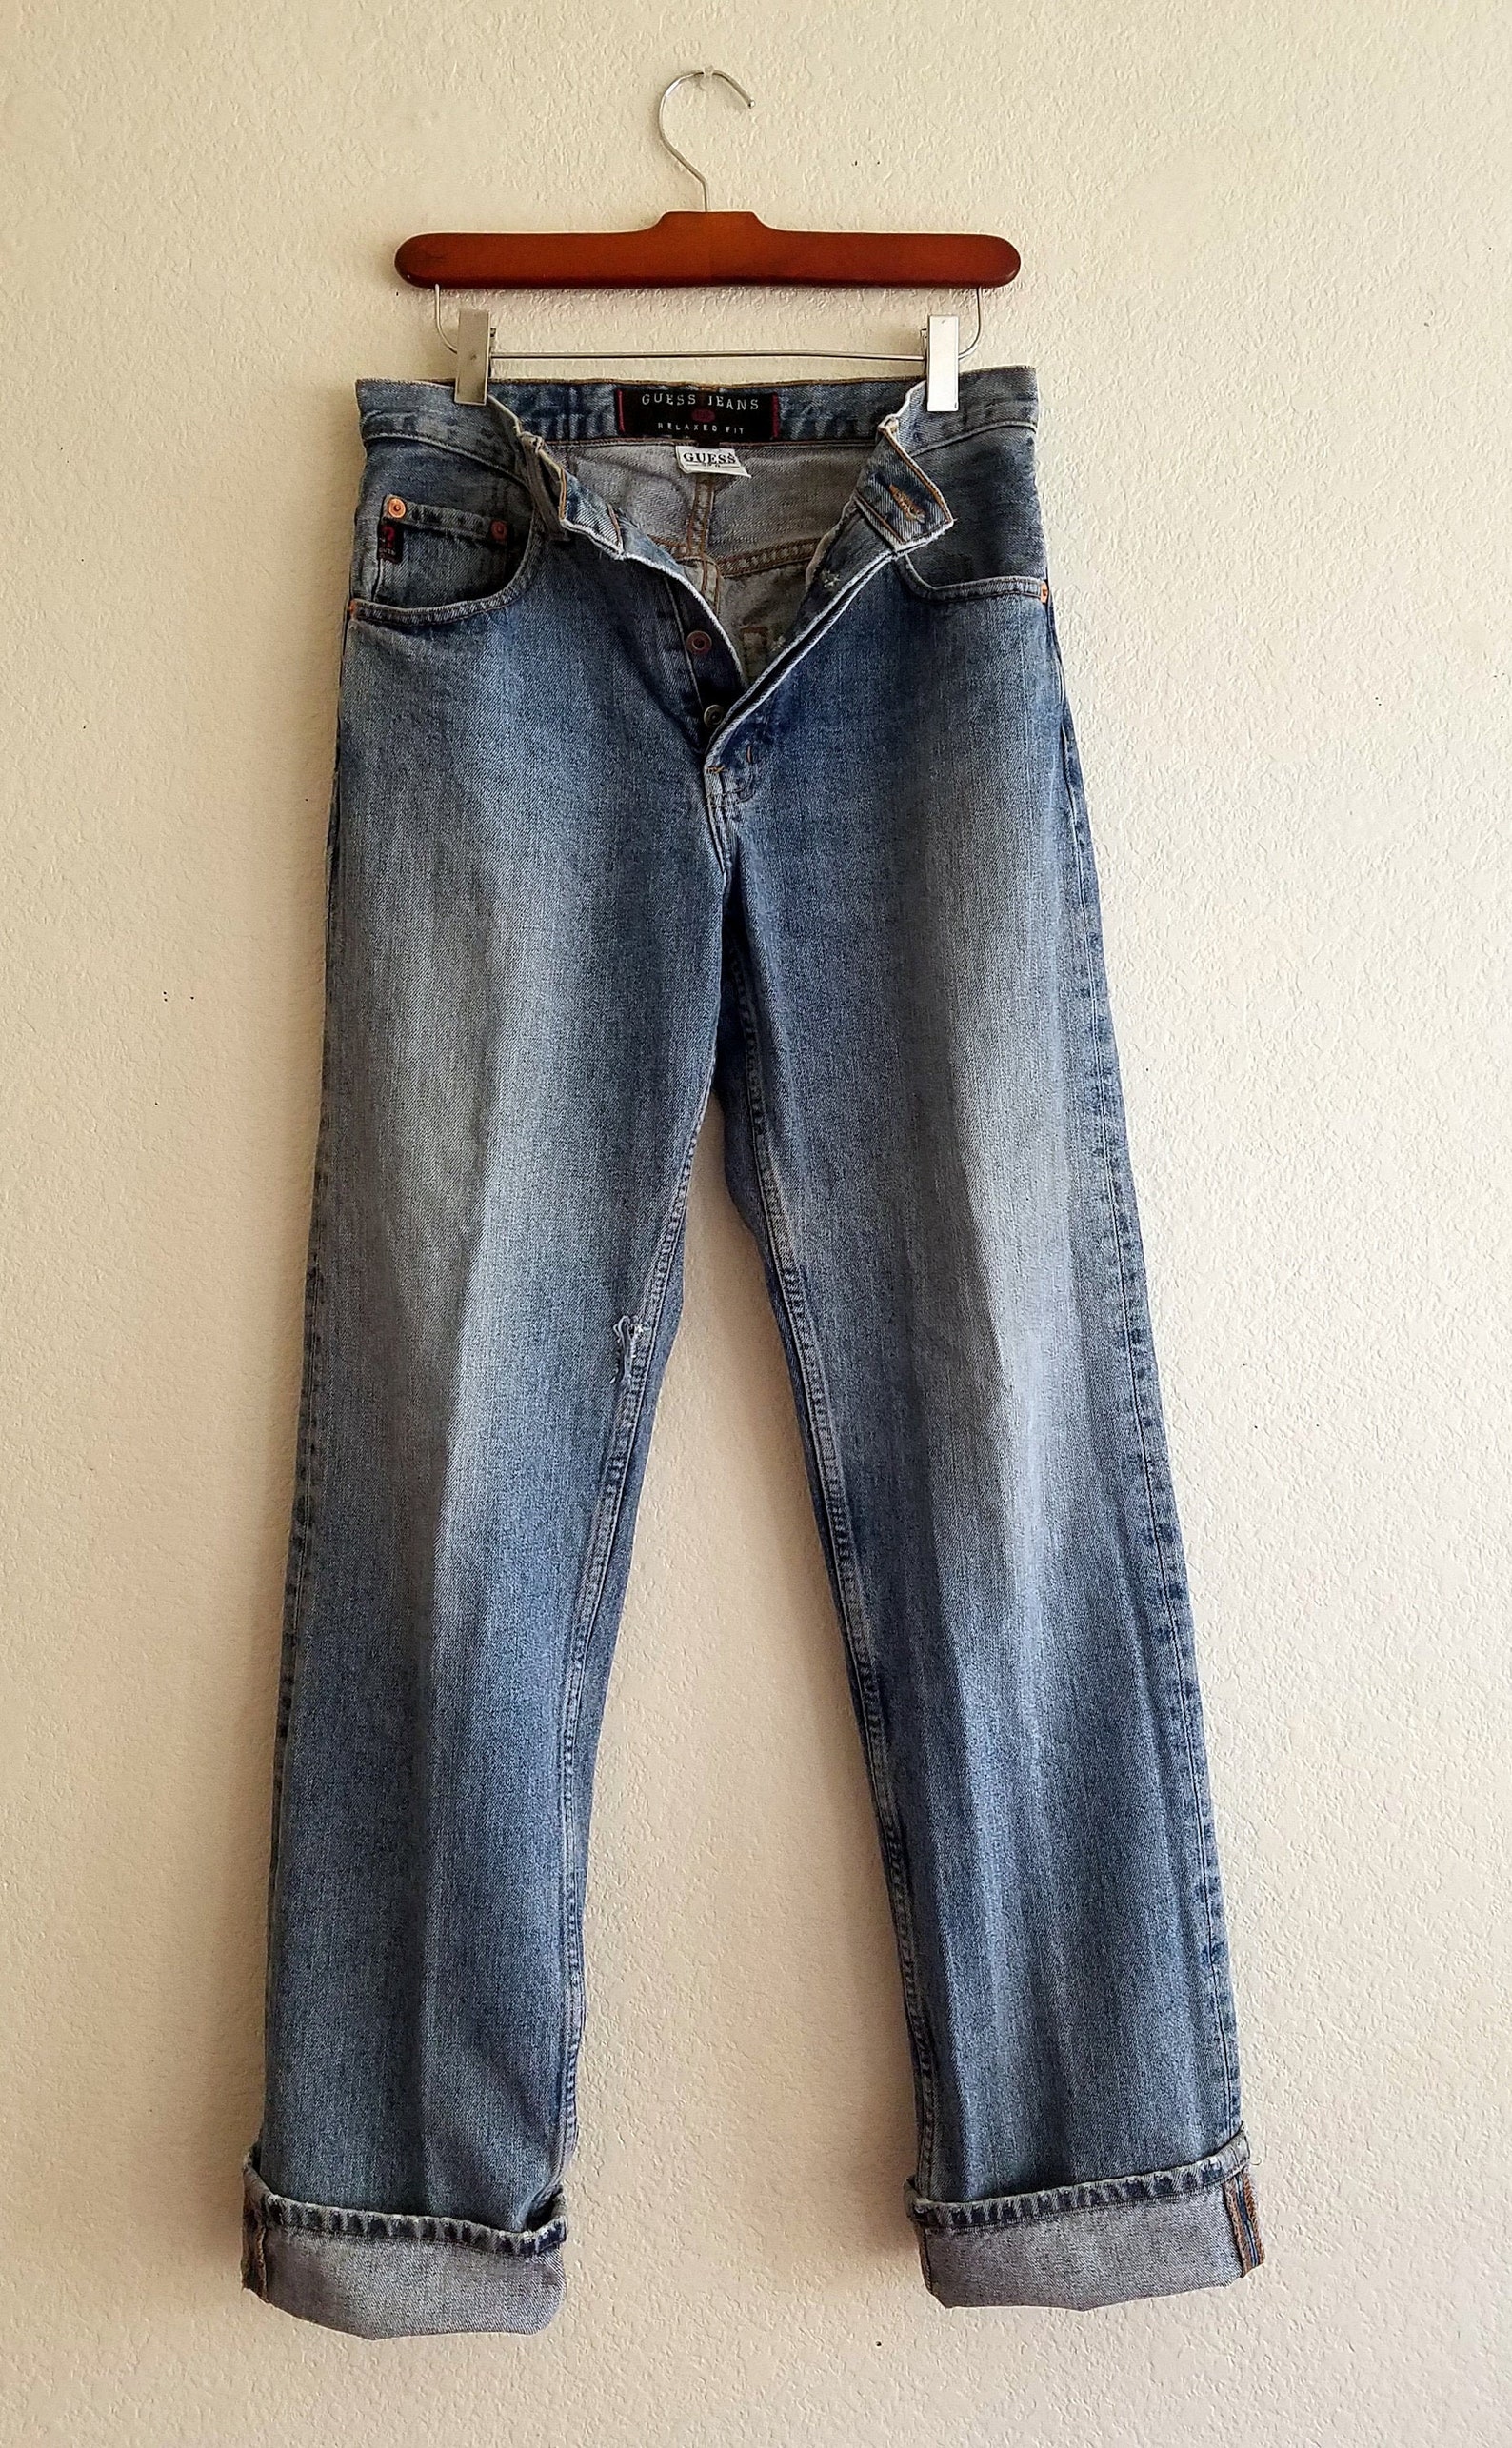 Guess Jeans 30x34 Distressed Blue Jeans Made in USA | Etsy